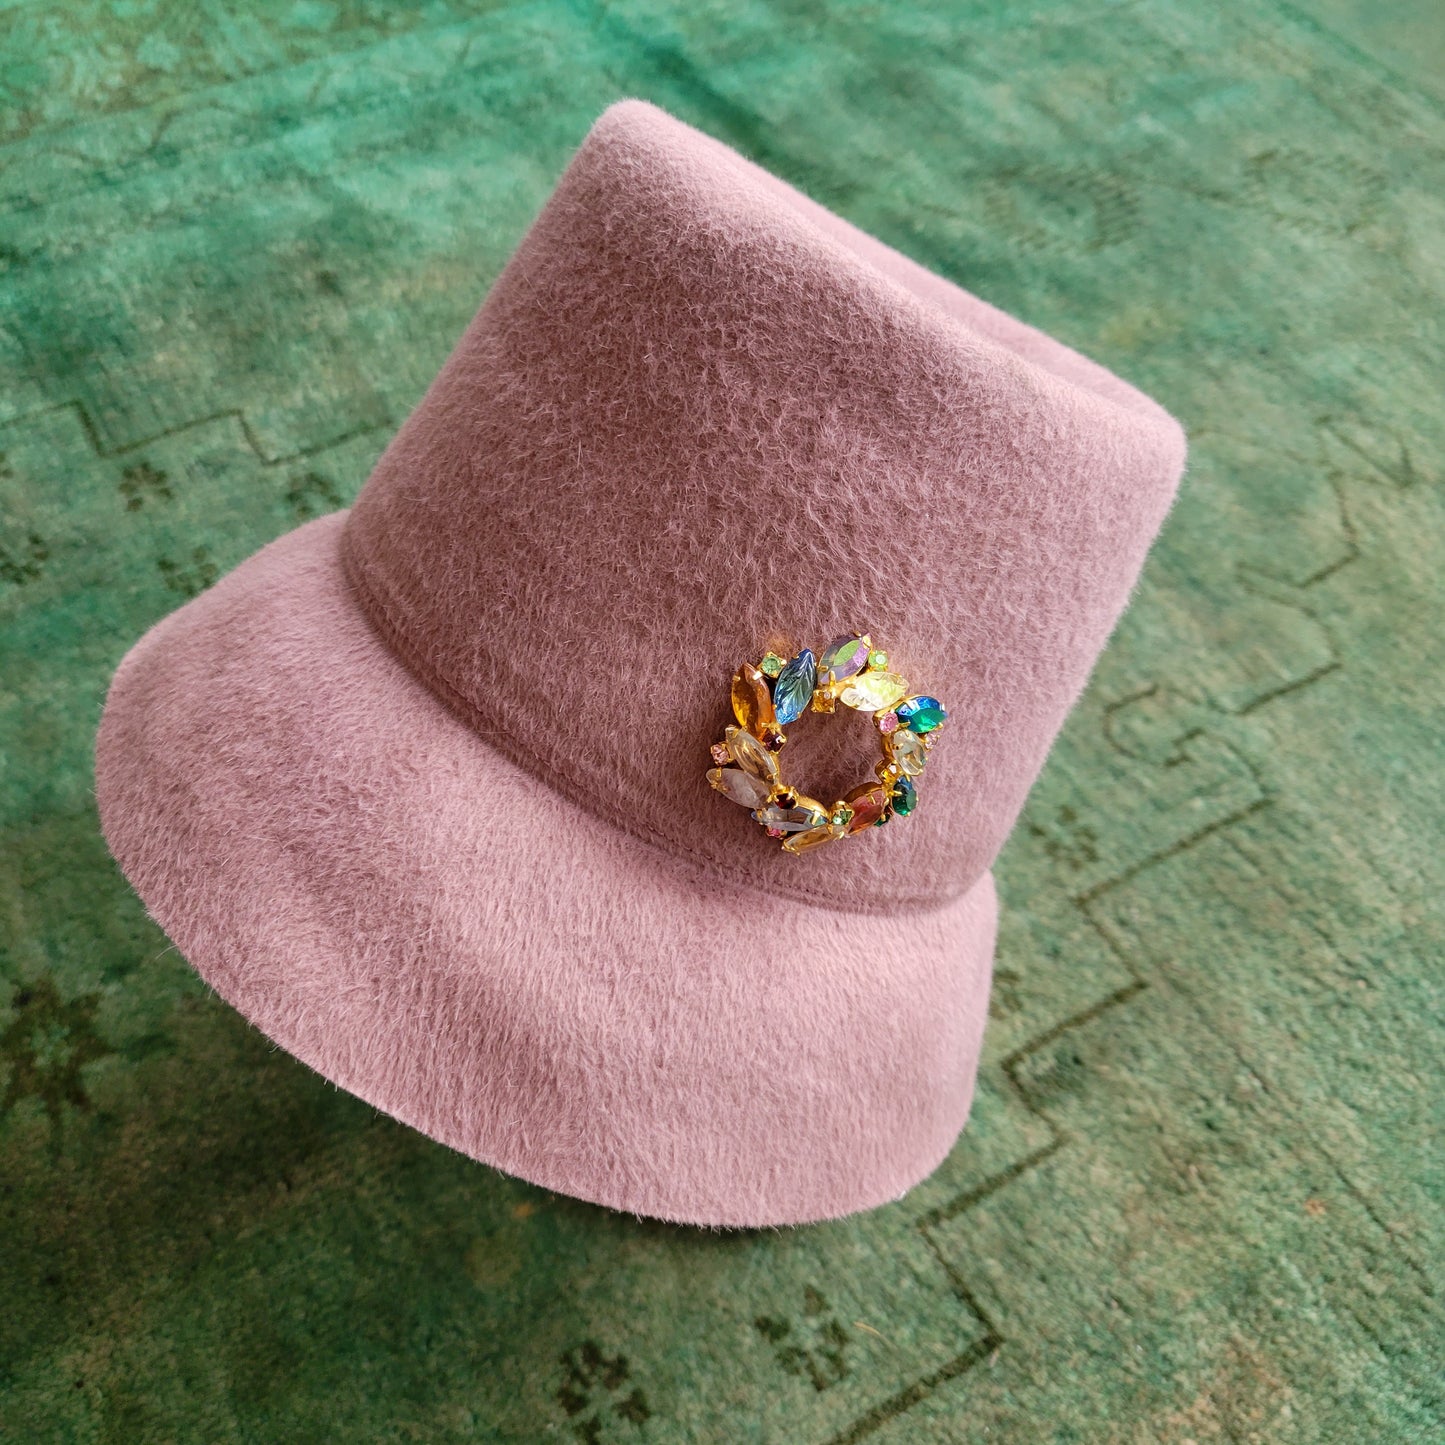 The Oliver with one-of-its-kind brooch